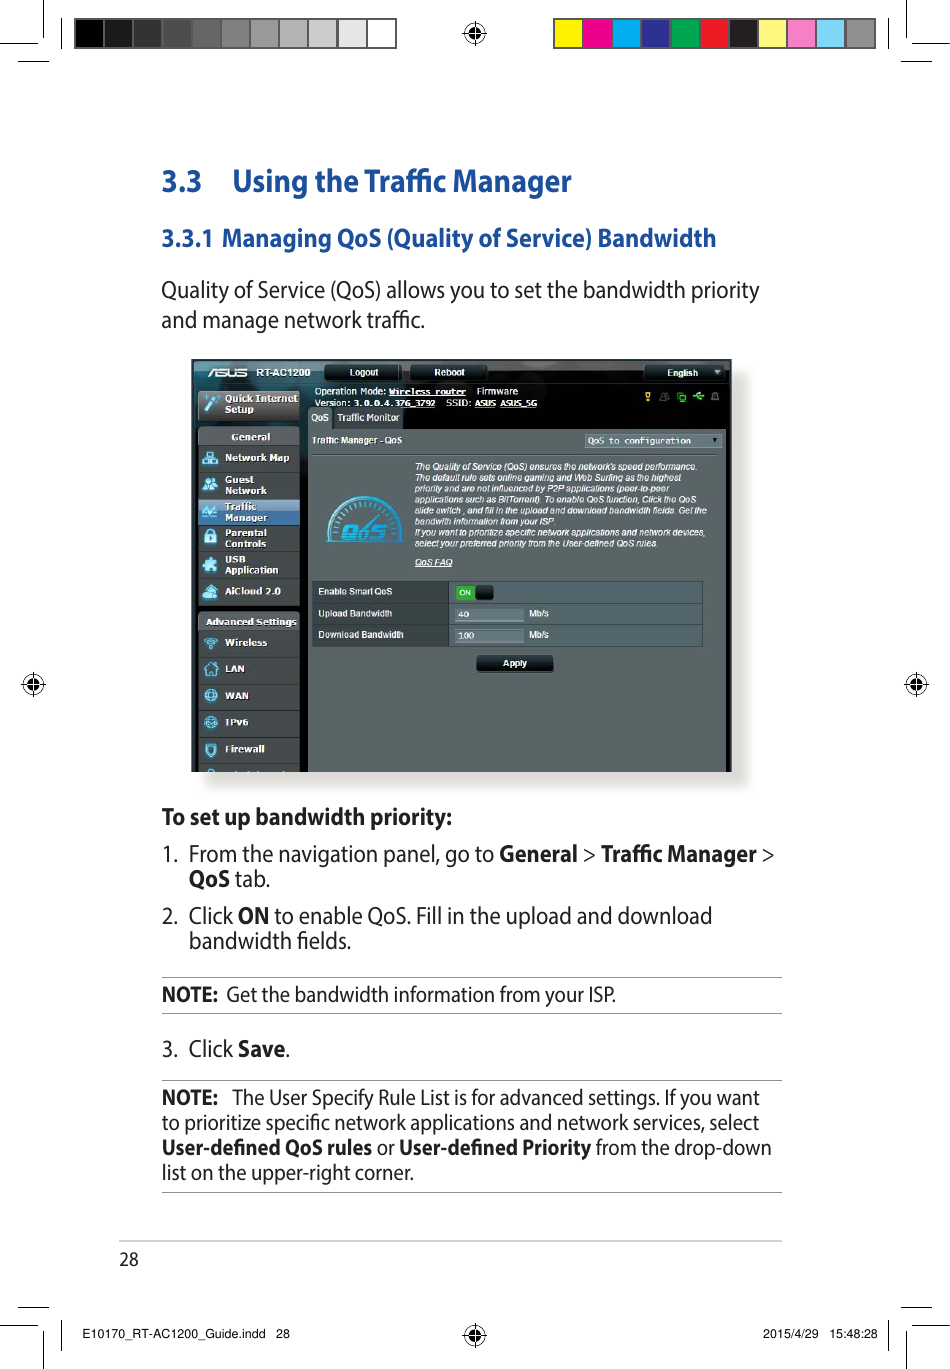 283.3  Using the Trac Manager3.3.1 Managing QoS (Quality of Service) BandwidthQuality of Service (QoS) allows you to set the bandwidth priority and manage network trac.To set up bandwidth priority:1.  From the navigation panel, go to General &gt; Trac Manager &gt; QoS tab.2. Click ON to enable QoS. Fill in the upload and download bandwidth elds.NOTE:  Get the bandwidth information from your ISP.3. Click Save.NOTE:   The User Specify Rule List is for advanced settings. If you want to prioritize specic network applications and network services, select User-dened QoS rules or User-dened Priority from the drop-down list on the upper-right corner.E10170_RT-AC1200_Guide.indd   28 2015/4/29   15:48:28